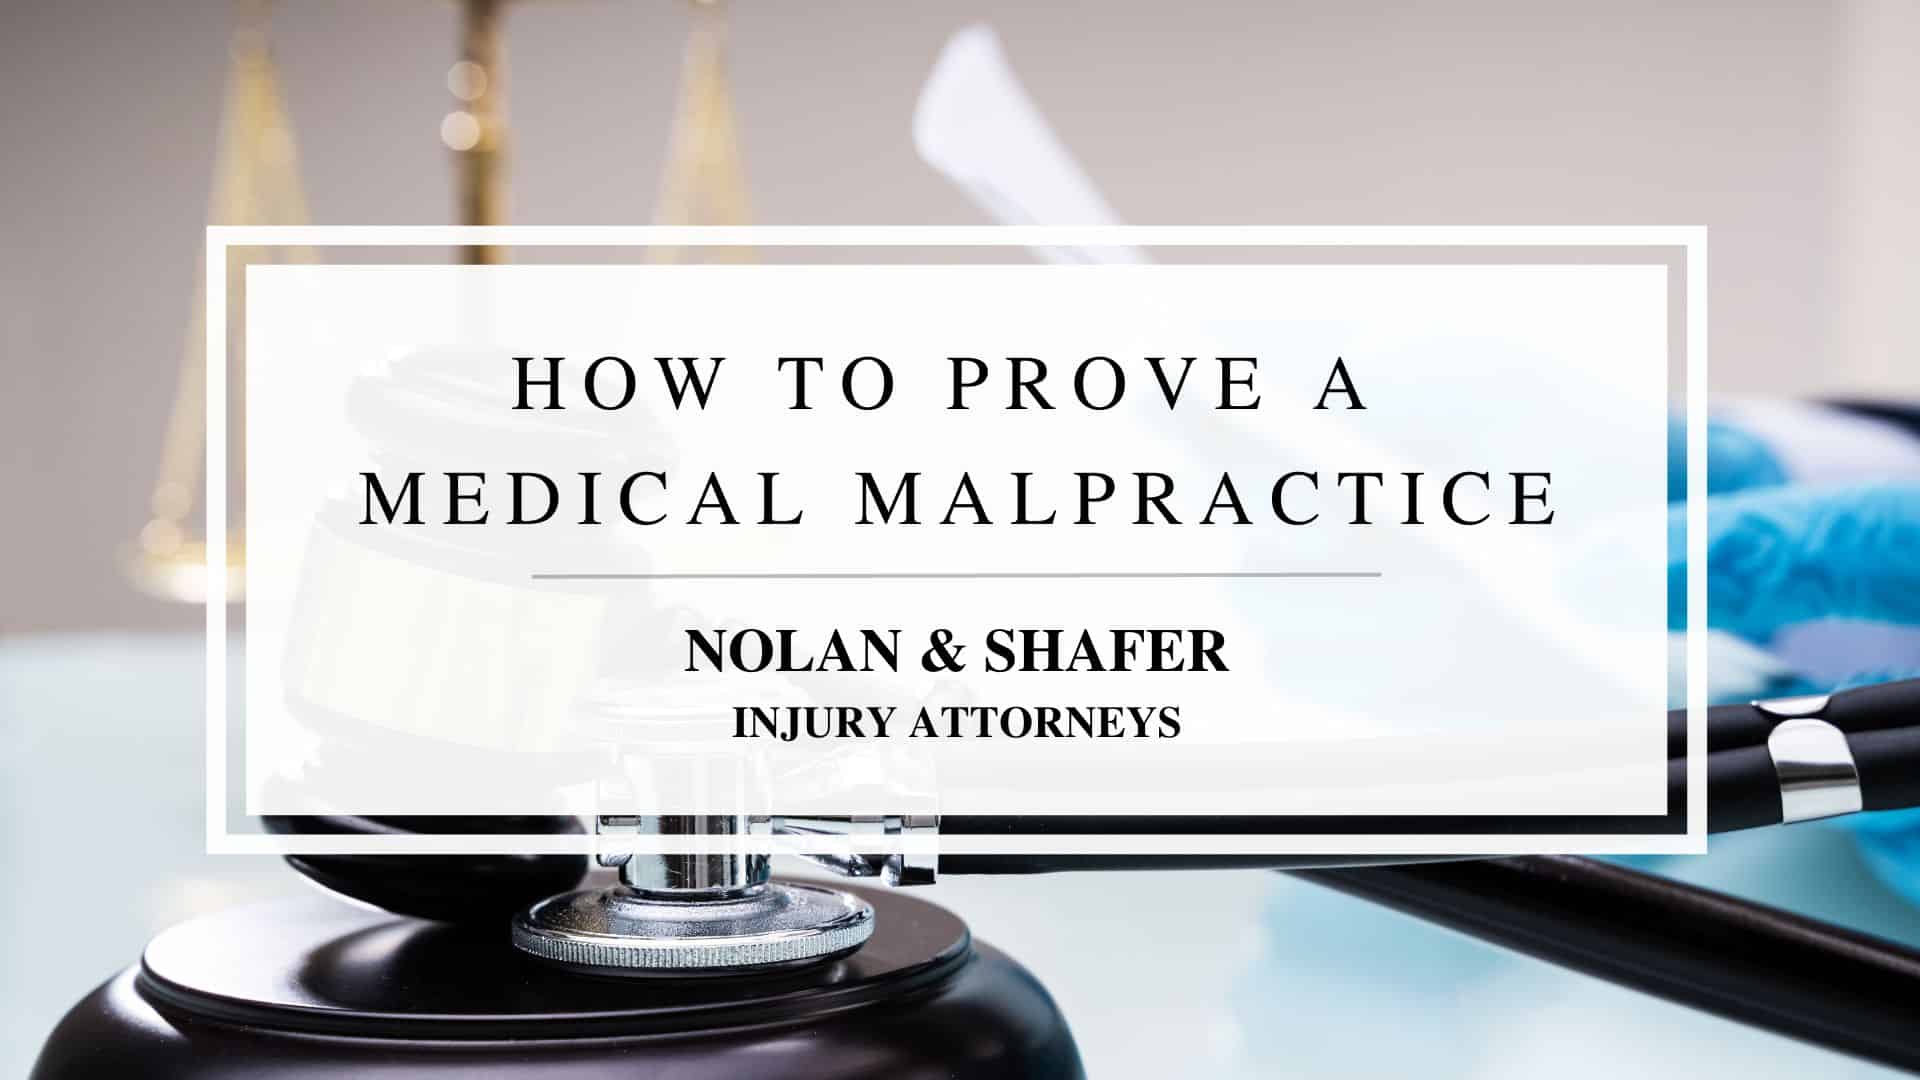 Featured image of how to prove a medical malpractice